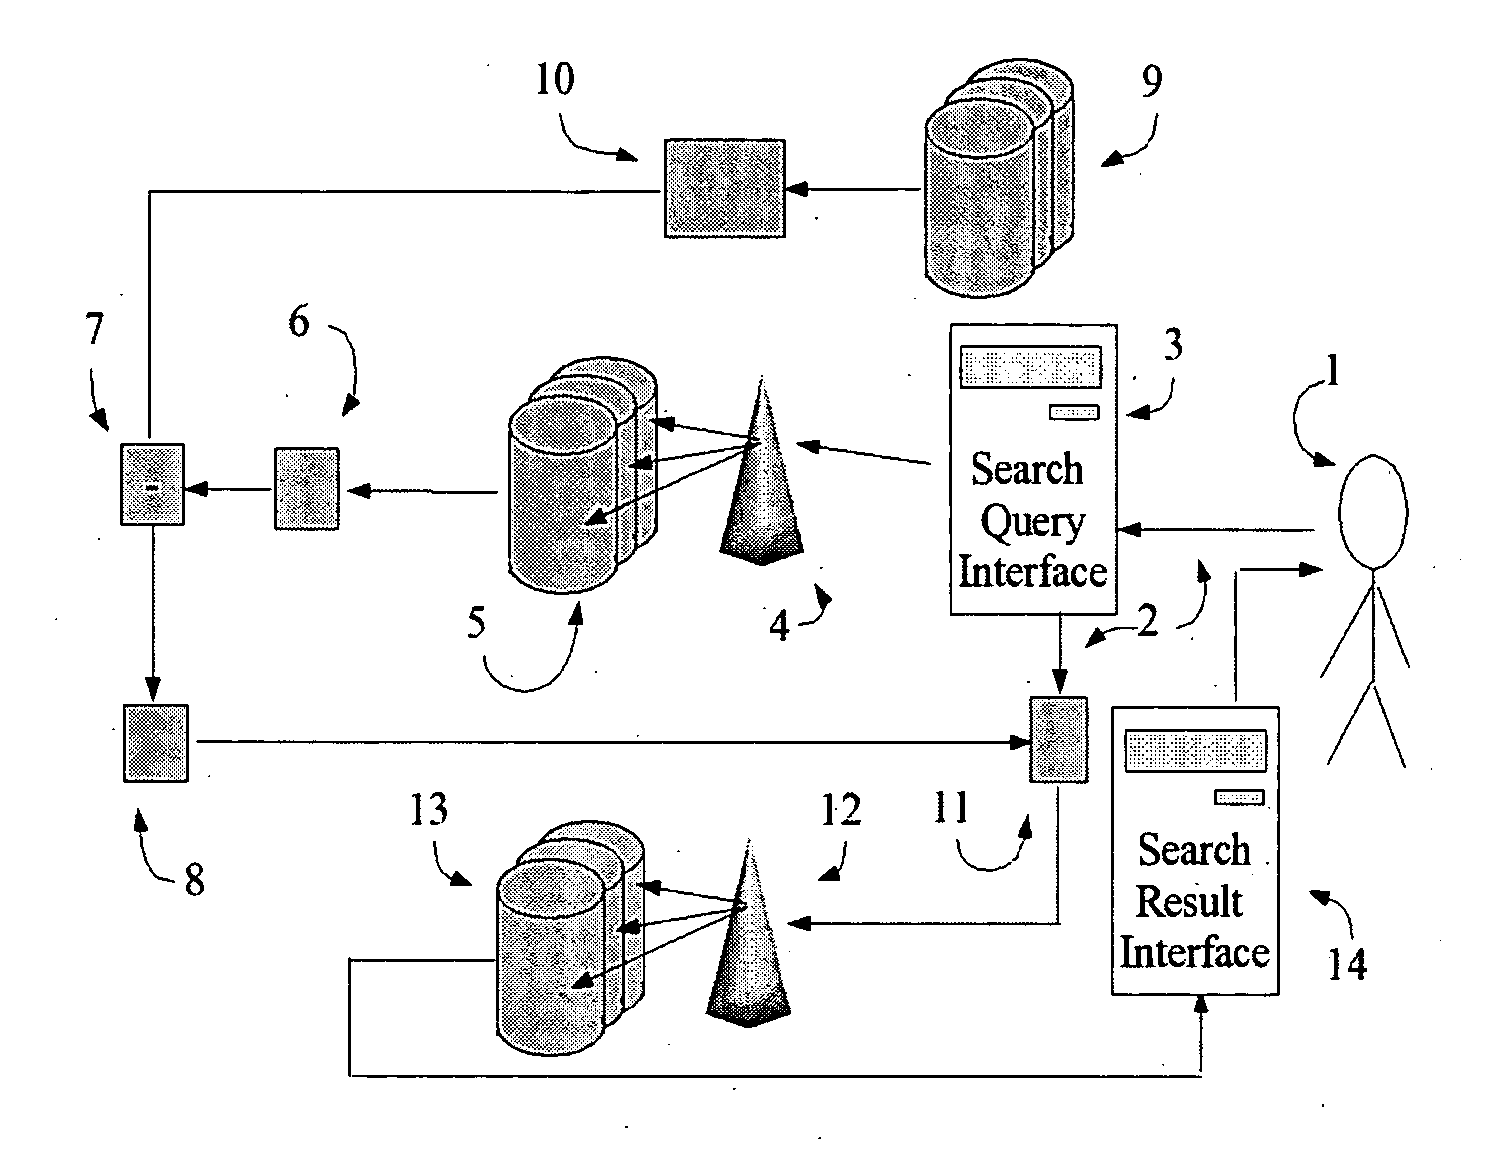 System and method for document analysis, processing and information extraction